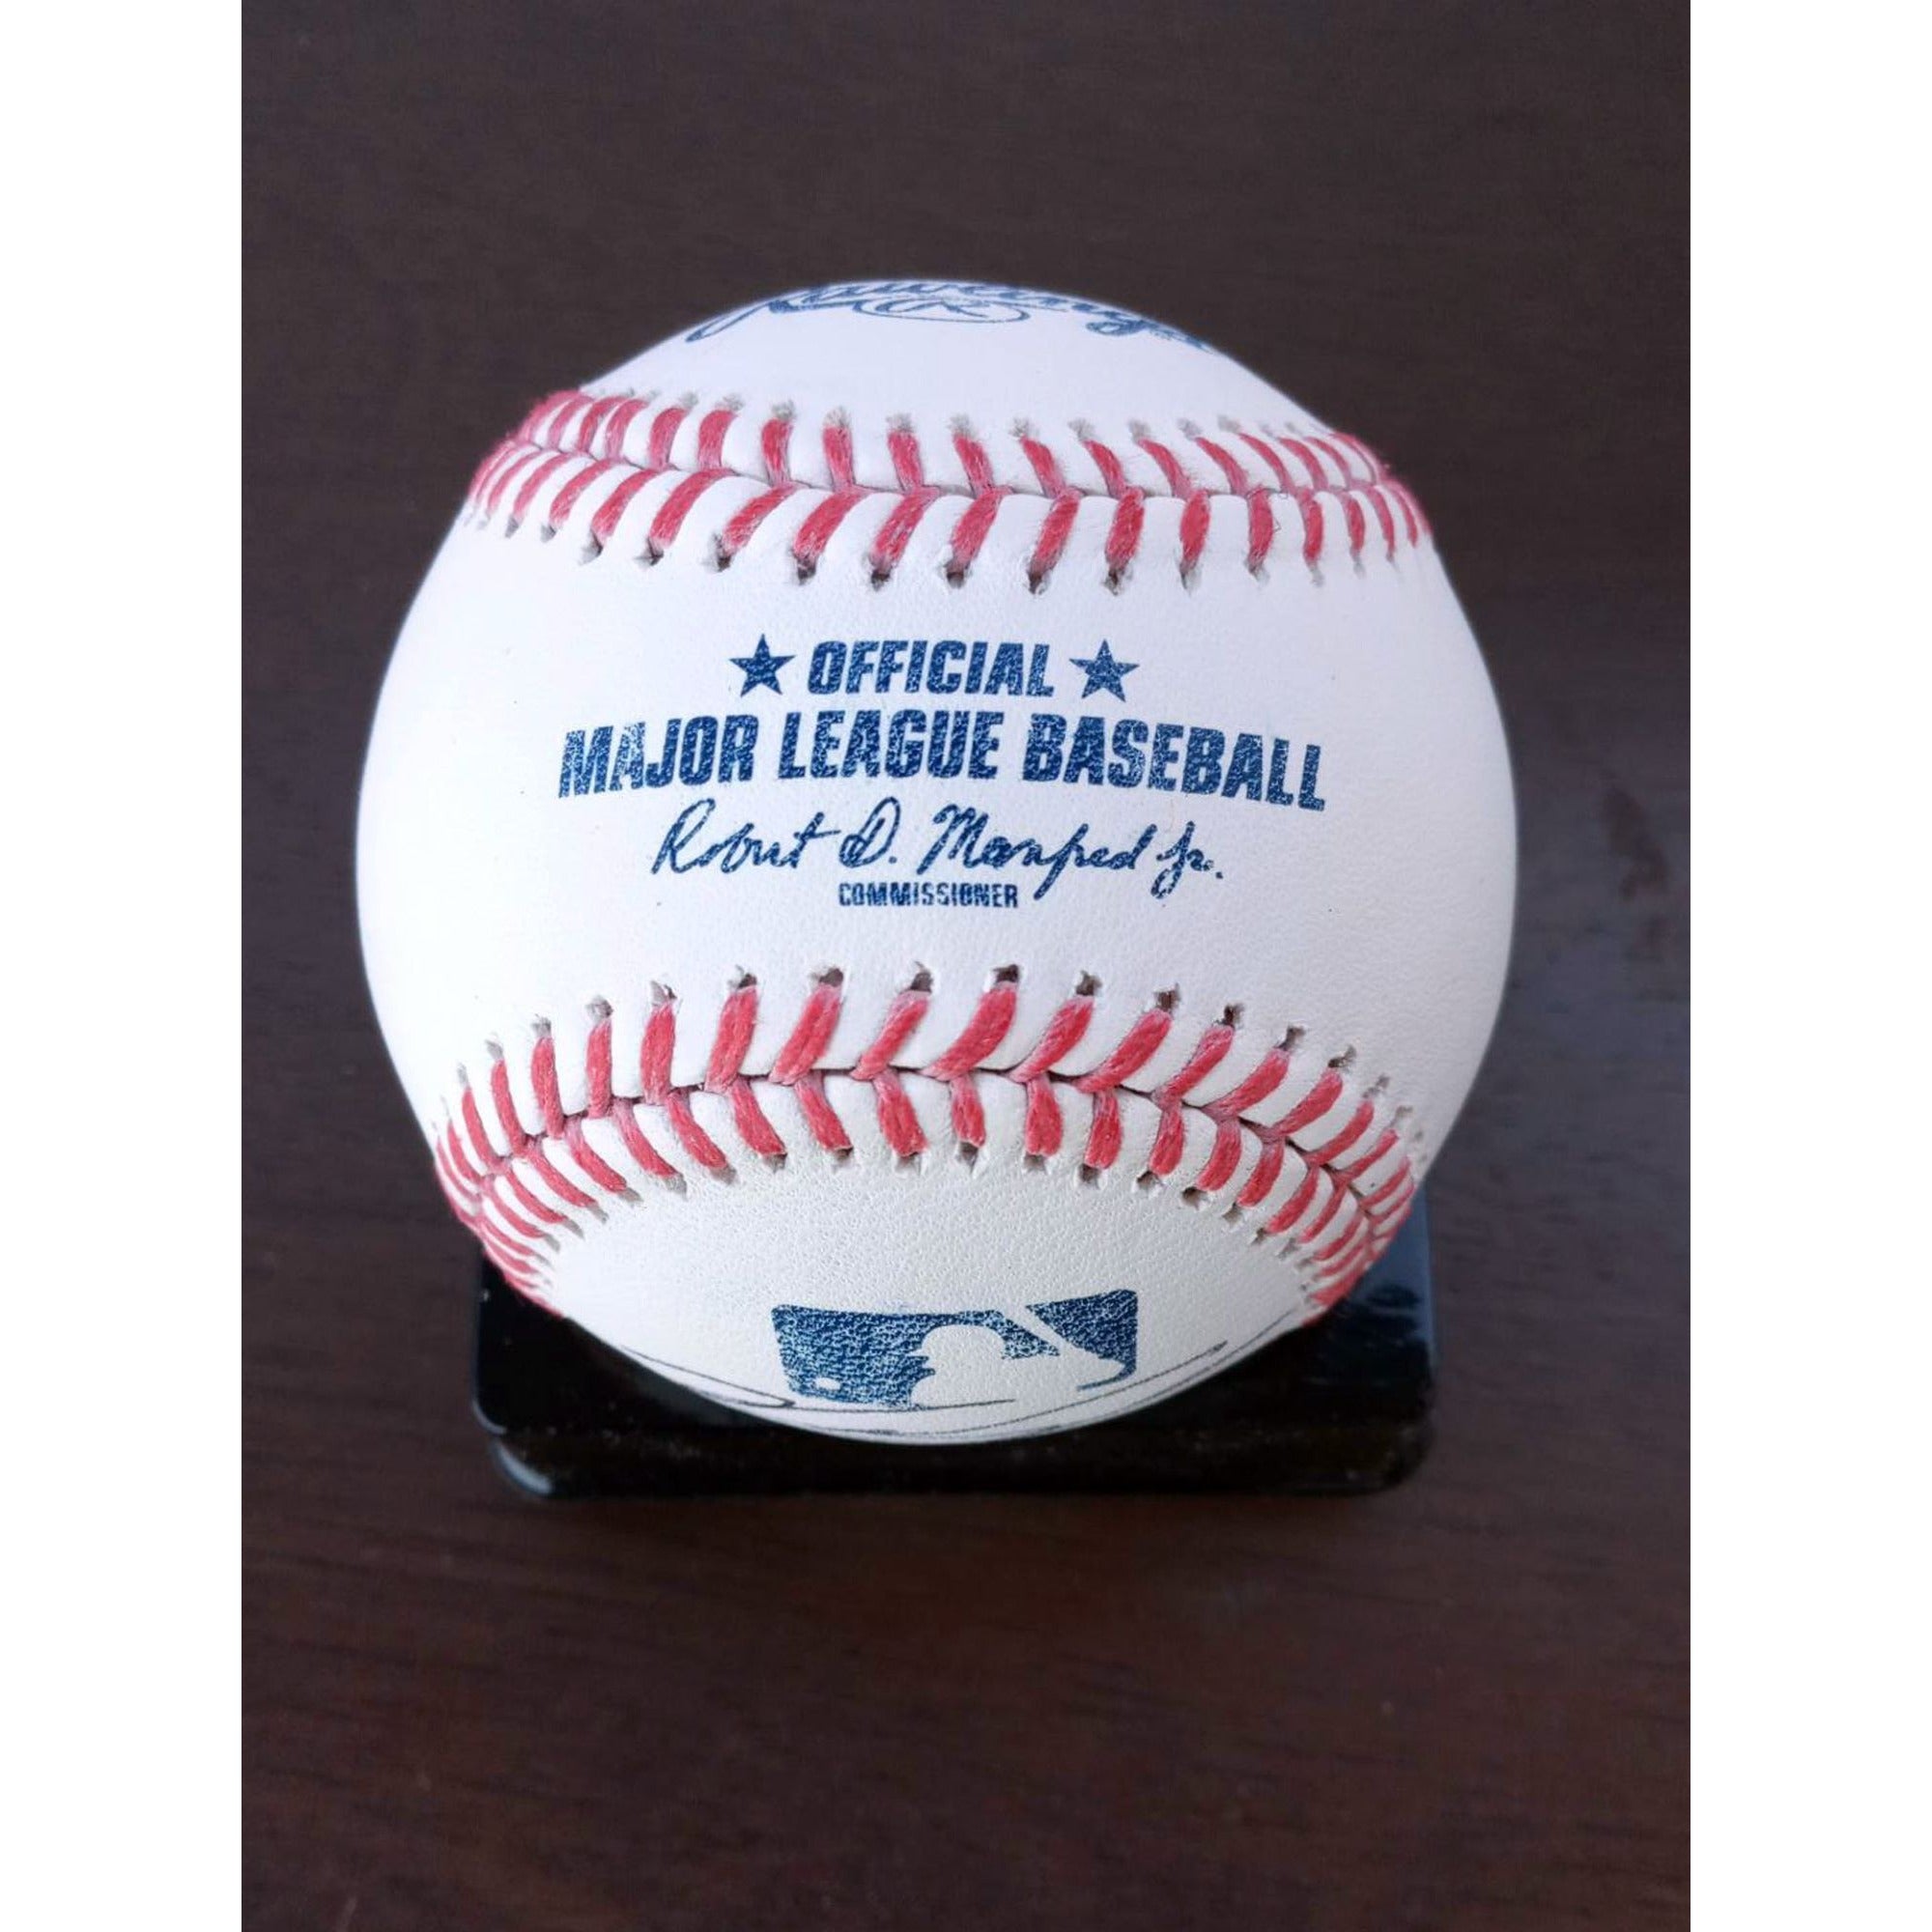 Bryce Harper and Kyle Schwarber Rawlings MLB baseball signed with